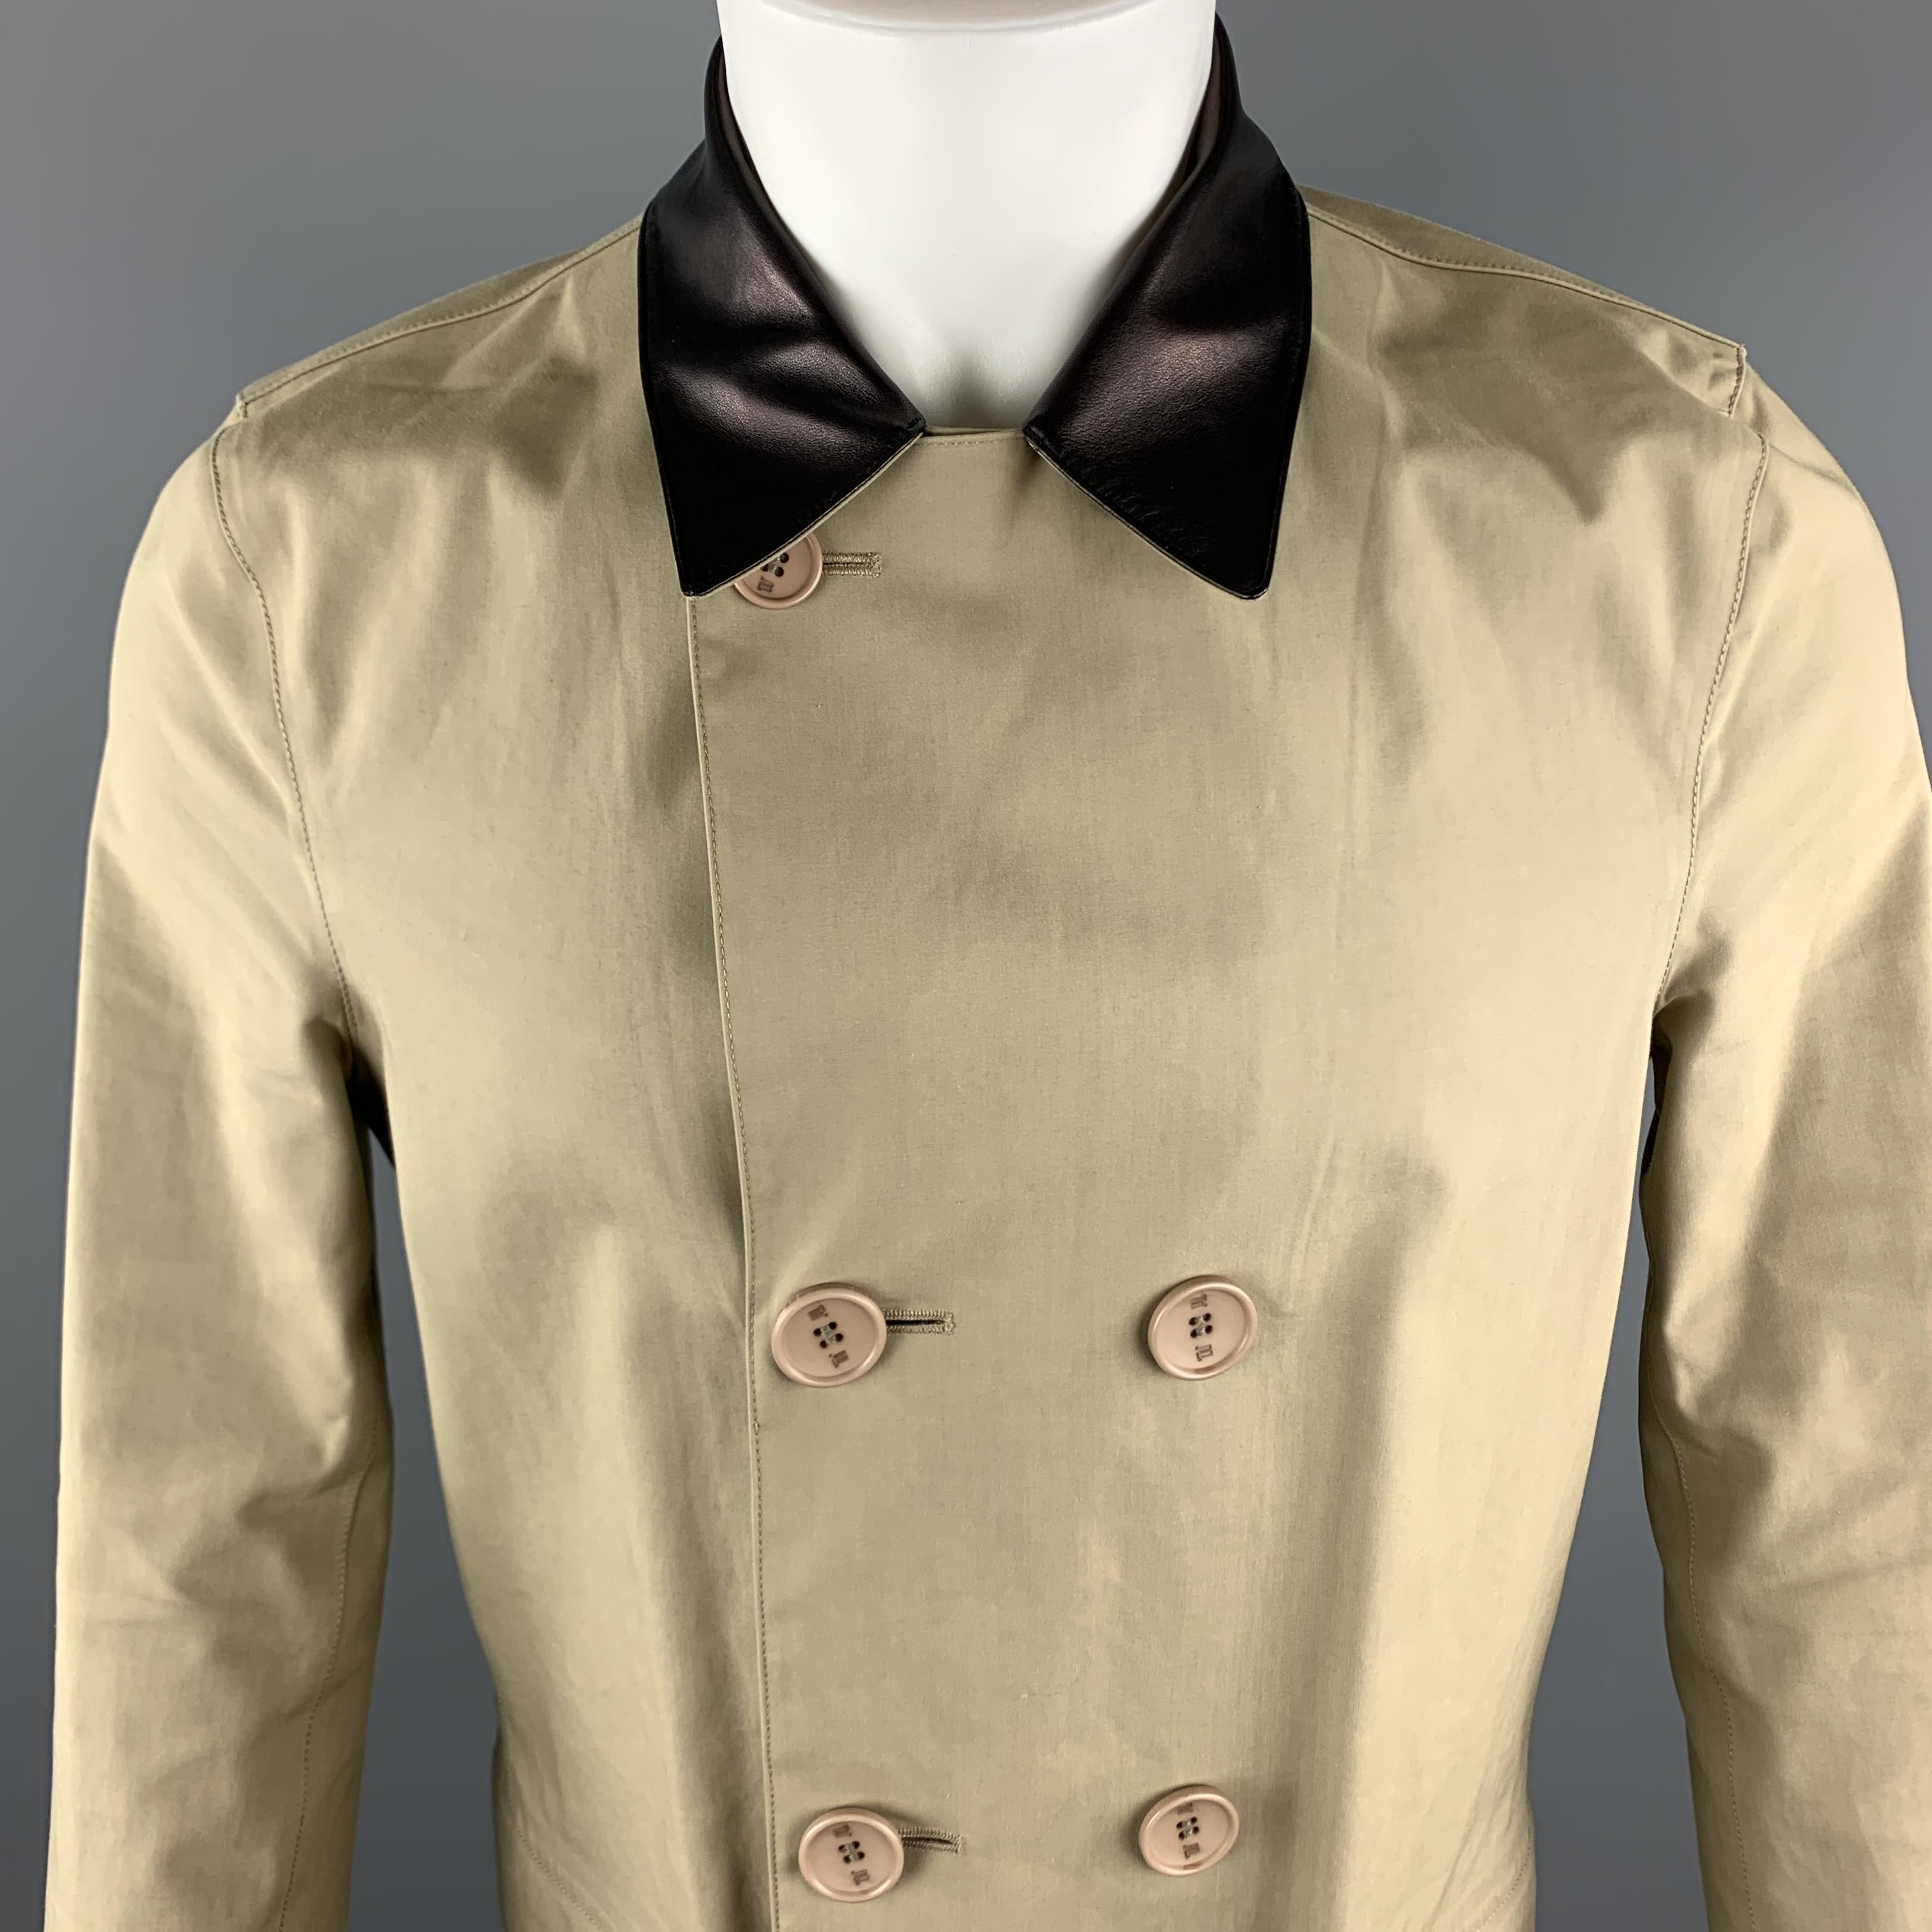 BALENCIAGA Coat comes in a khaki coated cotton material, with a leather collar, double breasted, patch pockets, unbuttoned cuffs, unlined. Minor wear. Made in Italy.

Very Good Pre-Owned Condition.
Marked: IT 48

Measurements:

Shoulder: 16 in.